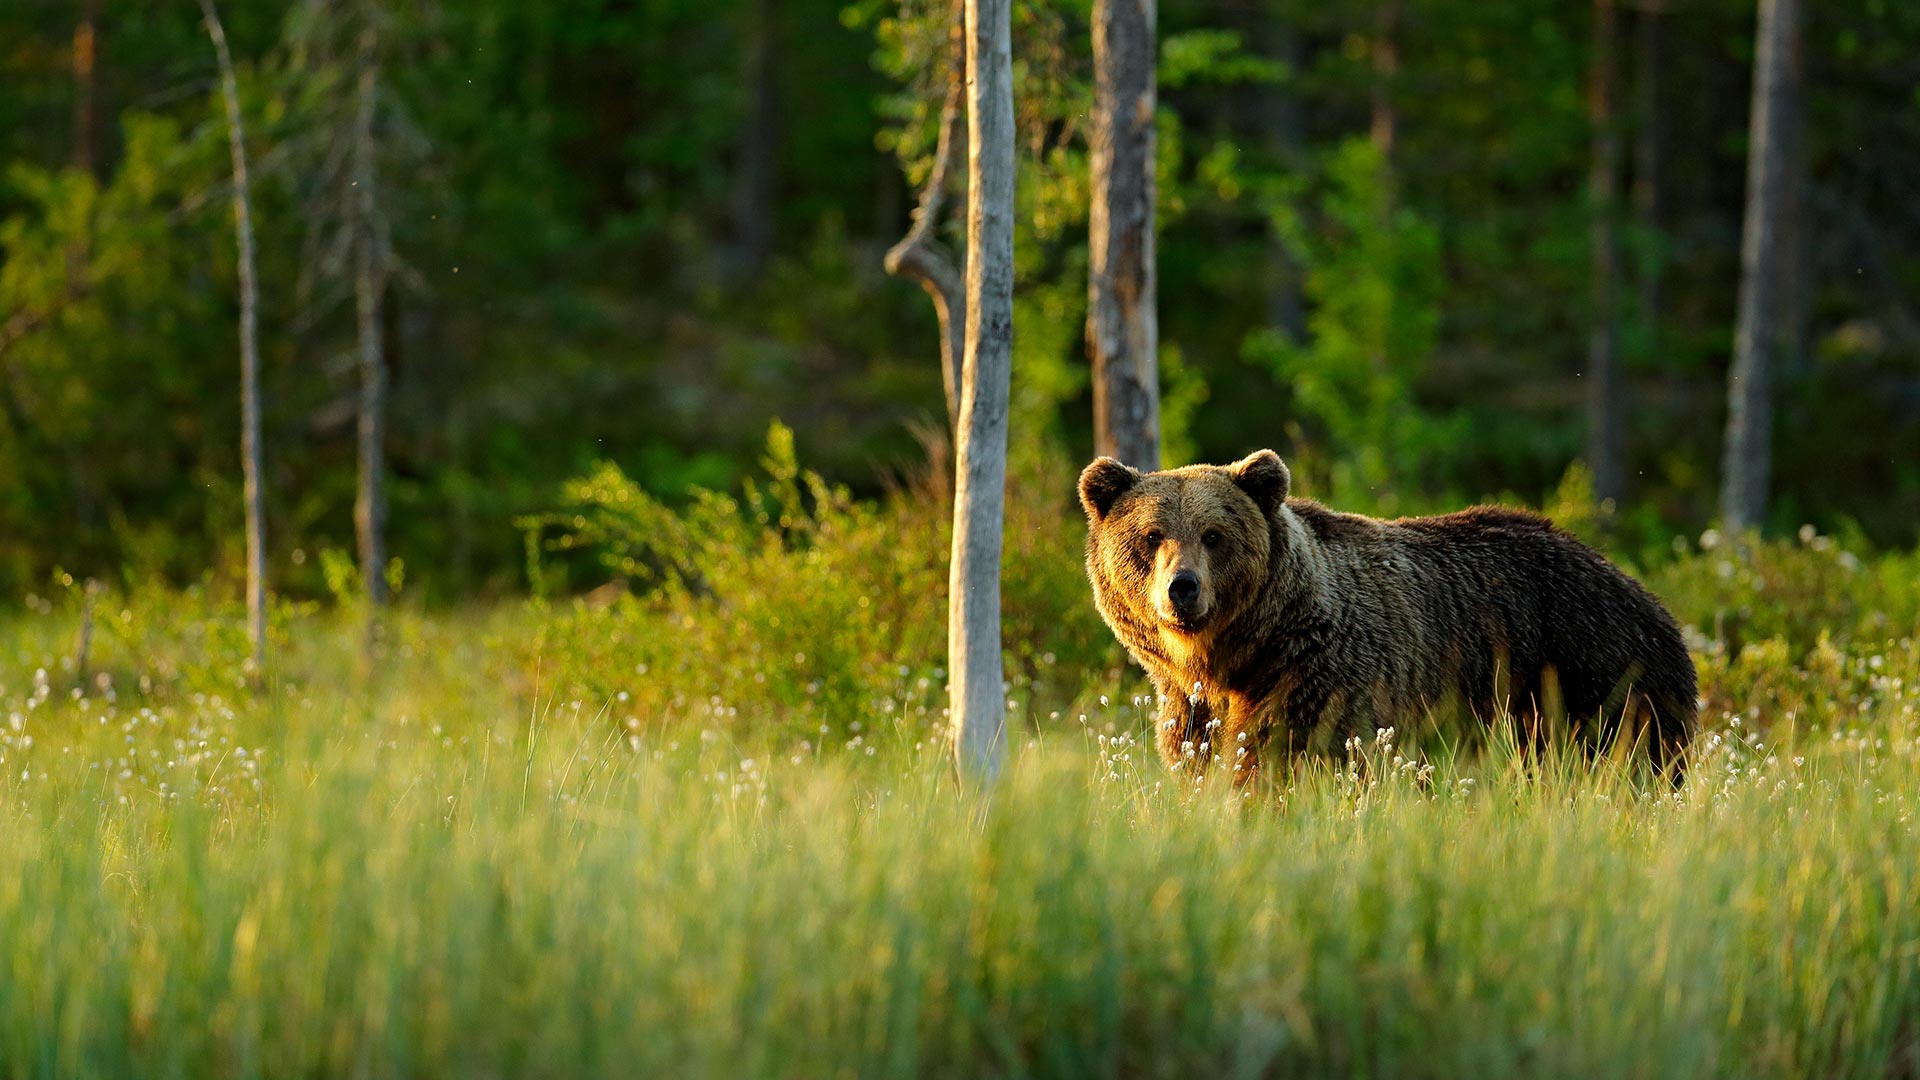 Brown bear in the wilderness at sunset